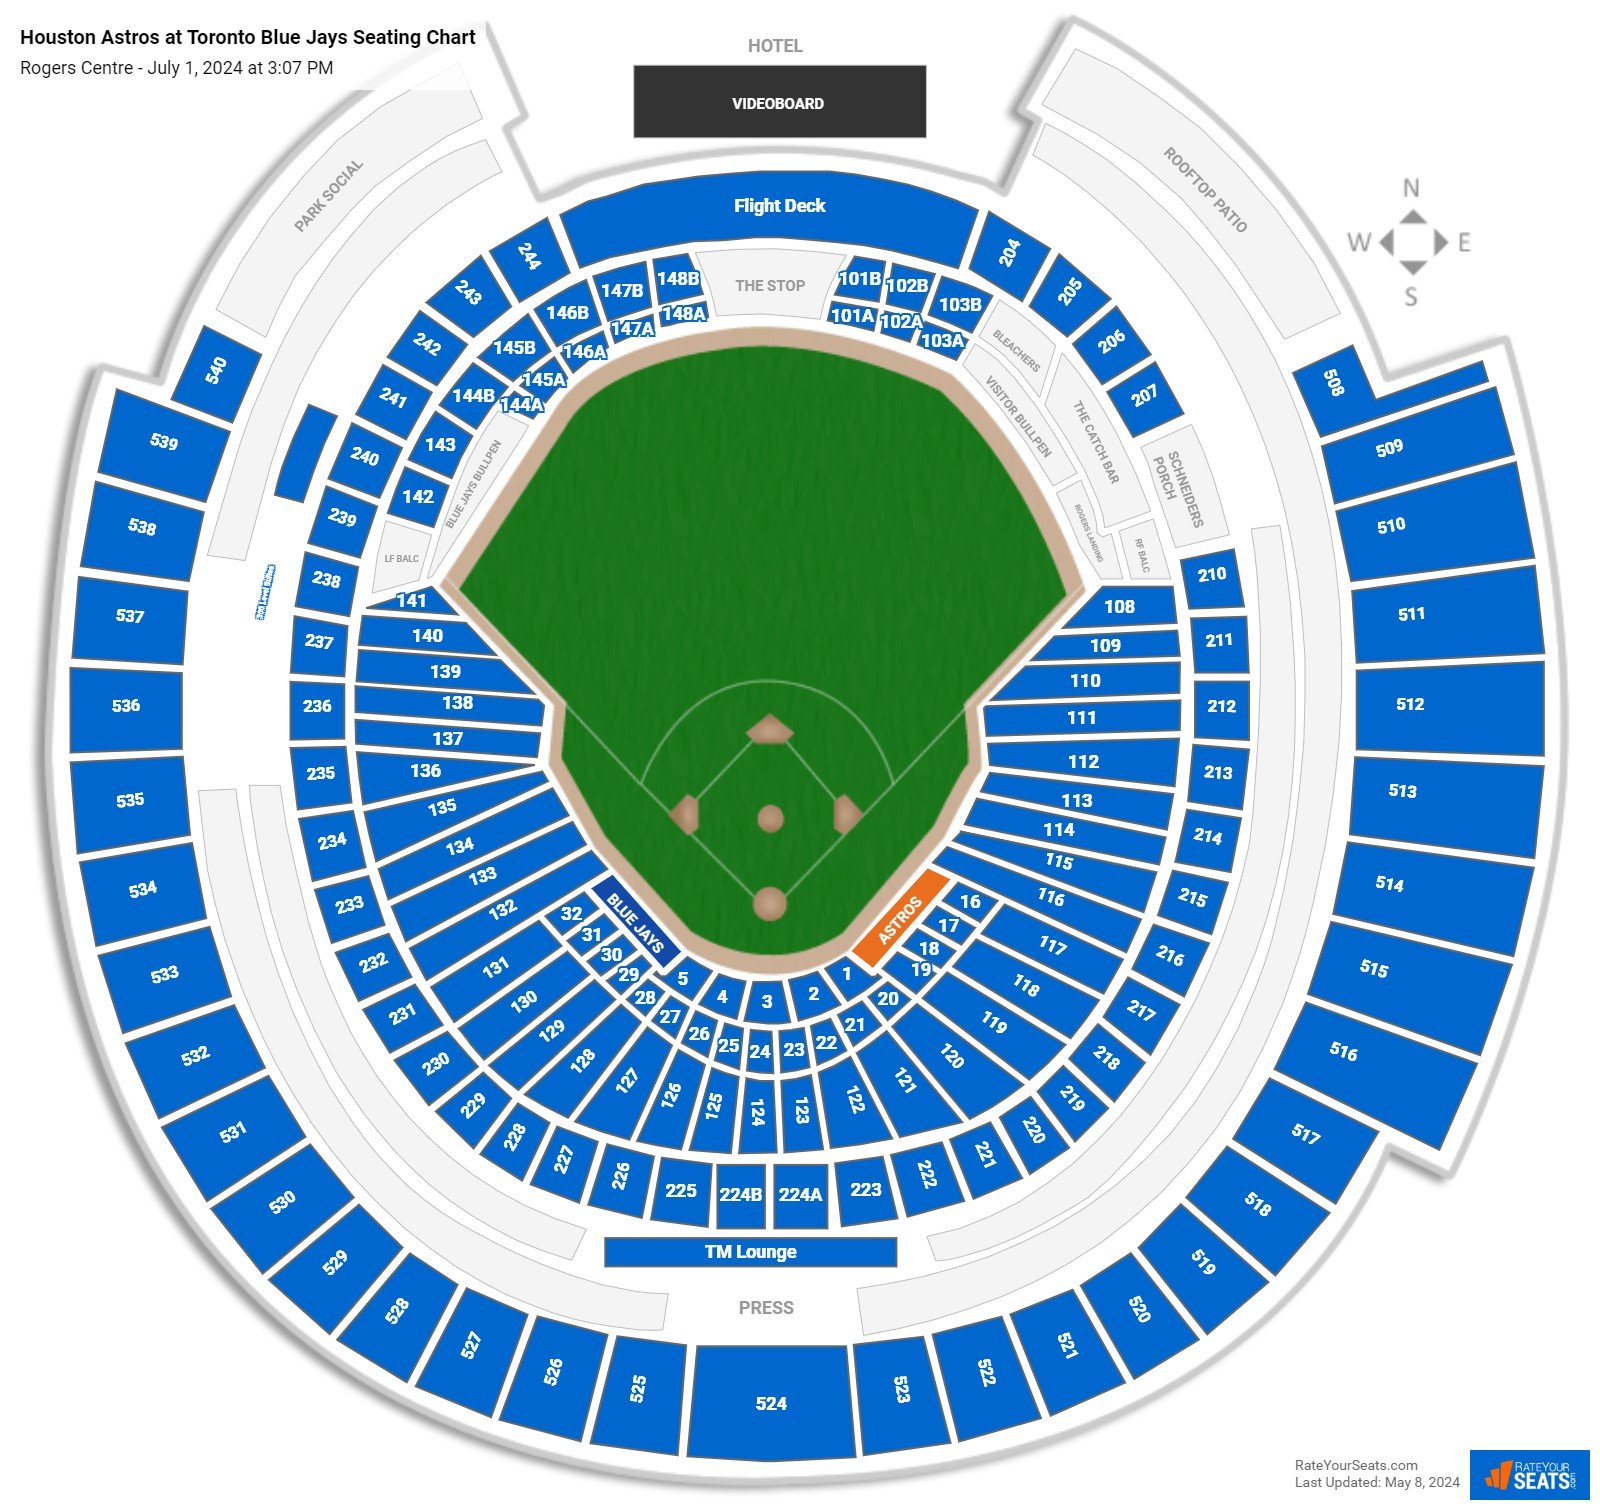 Houston Astros at Toronto Blue Jays seating chart Rogers Centre